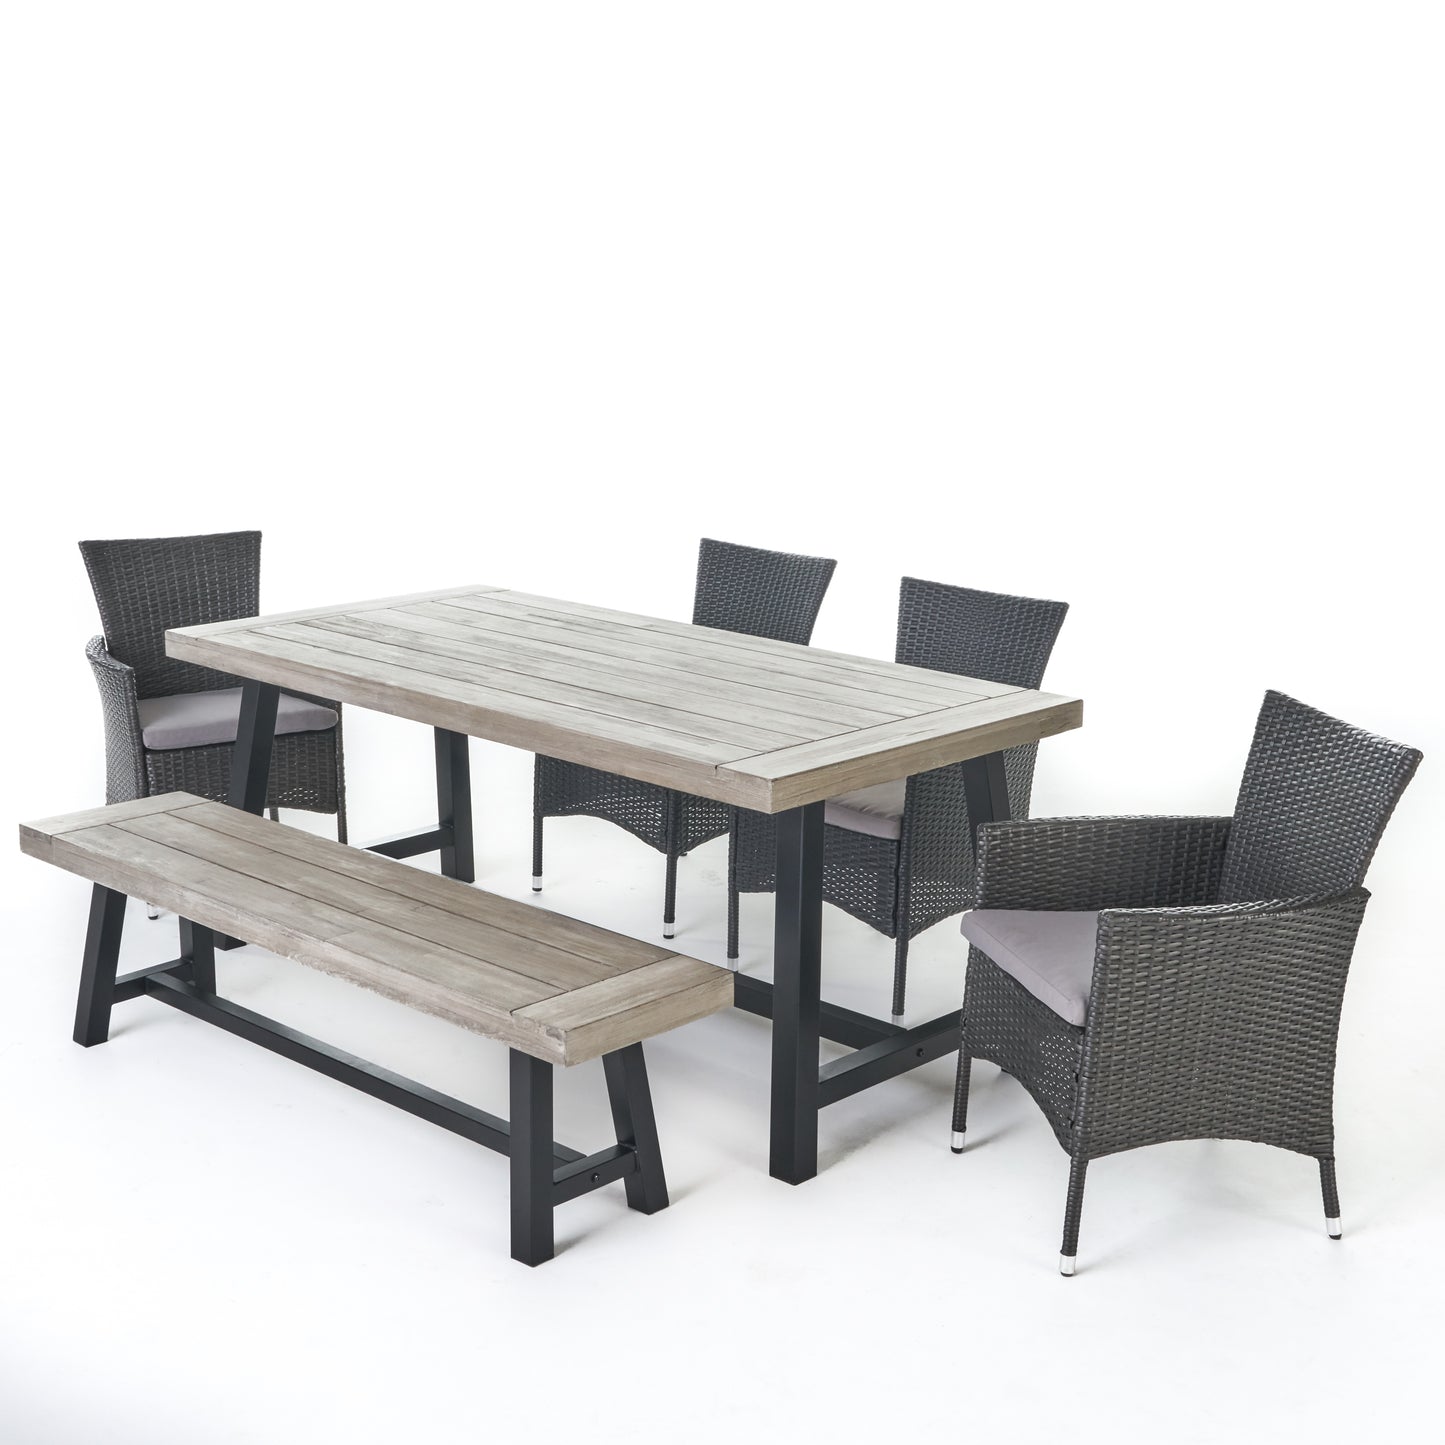 Linda Outdoor 6 Piece Wicker Dining Set with Acacia Wood Table and Bench